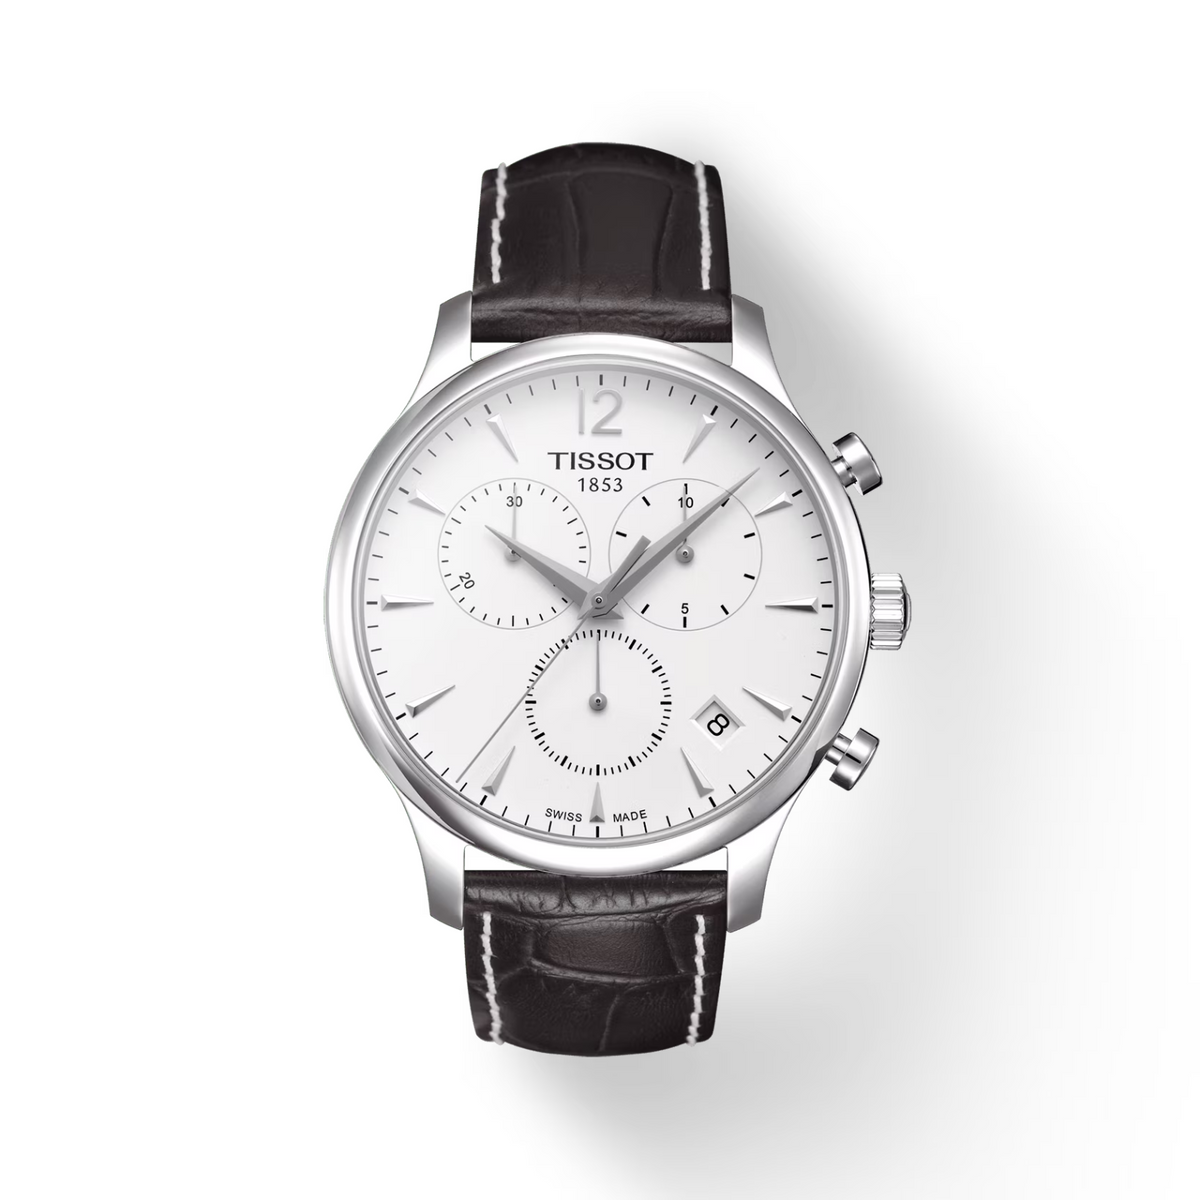 Tissot Tradition Chronograph White Dial Leather Strap Swiss Watch T0636171603700